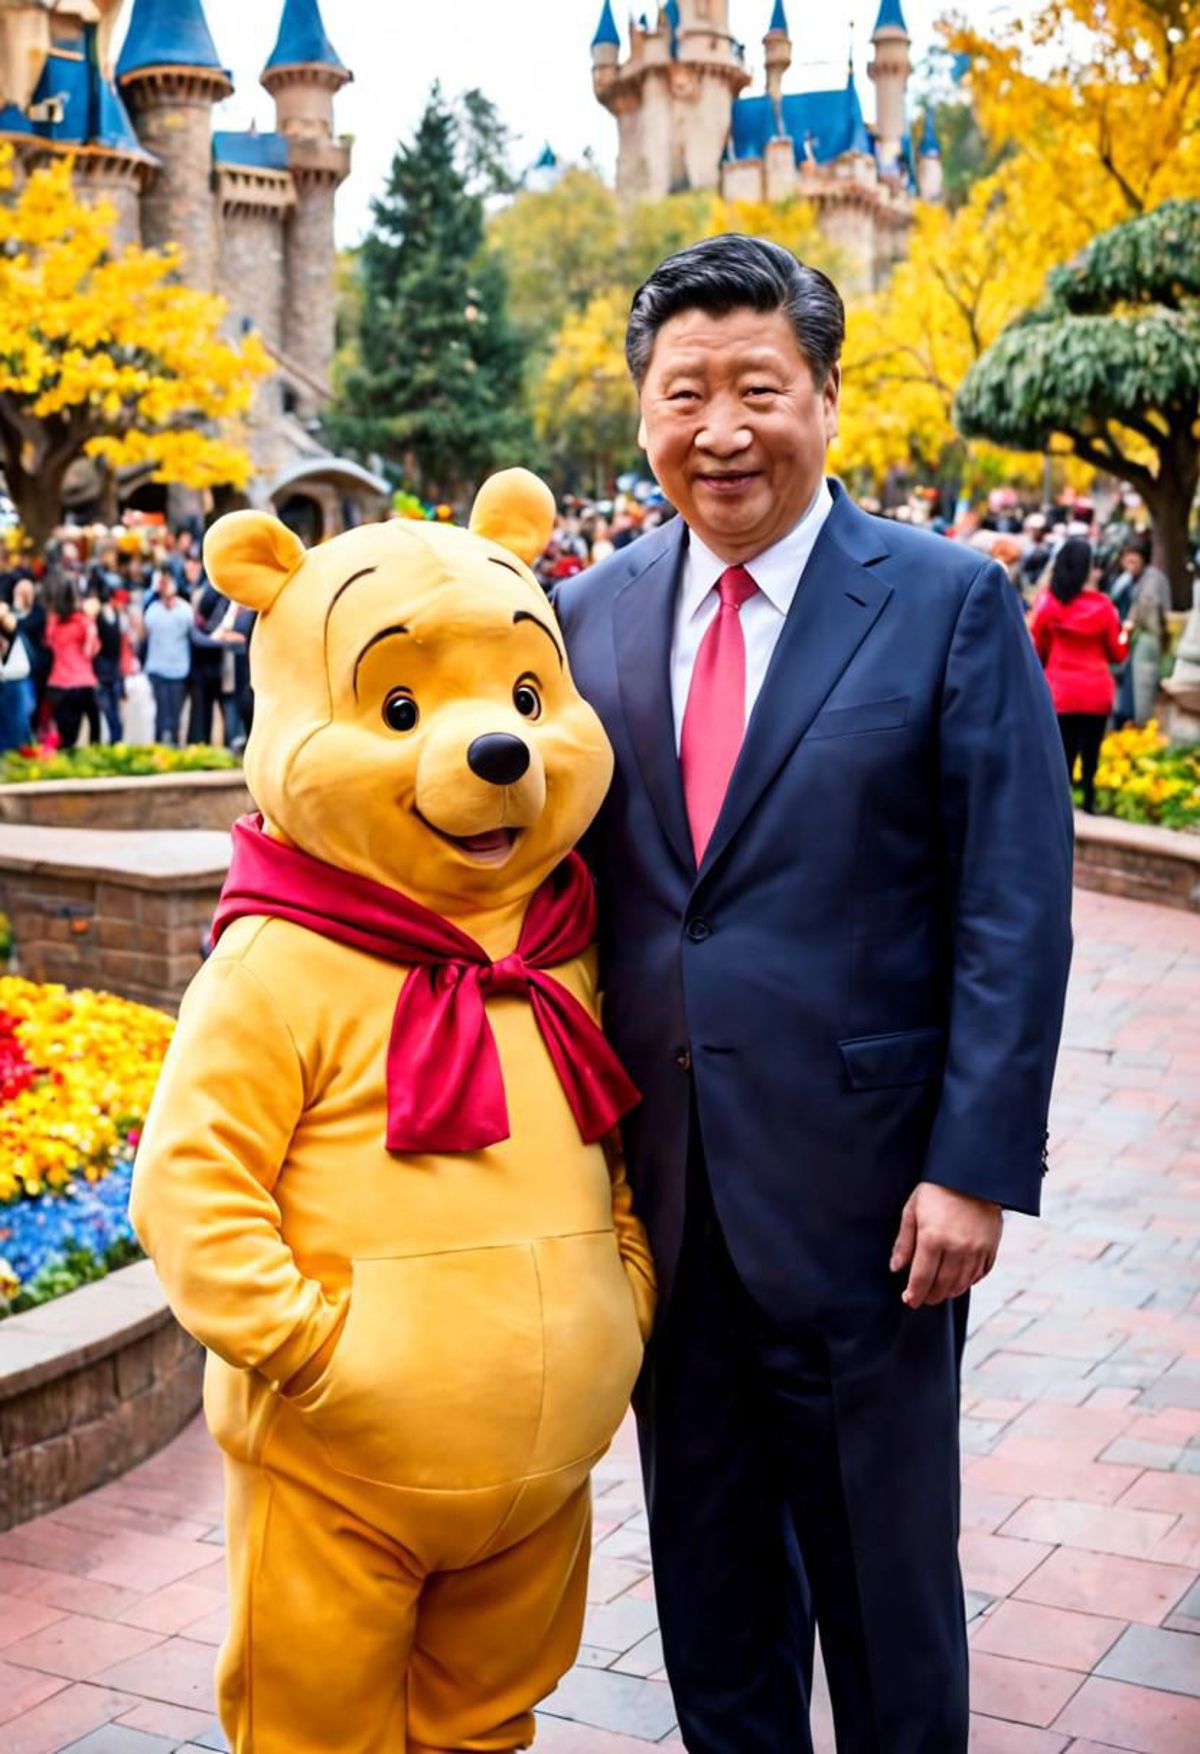 Man in a suit standing next to a giant Winnie the Pooh costume.